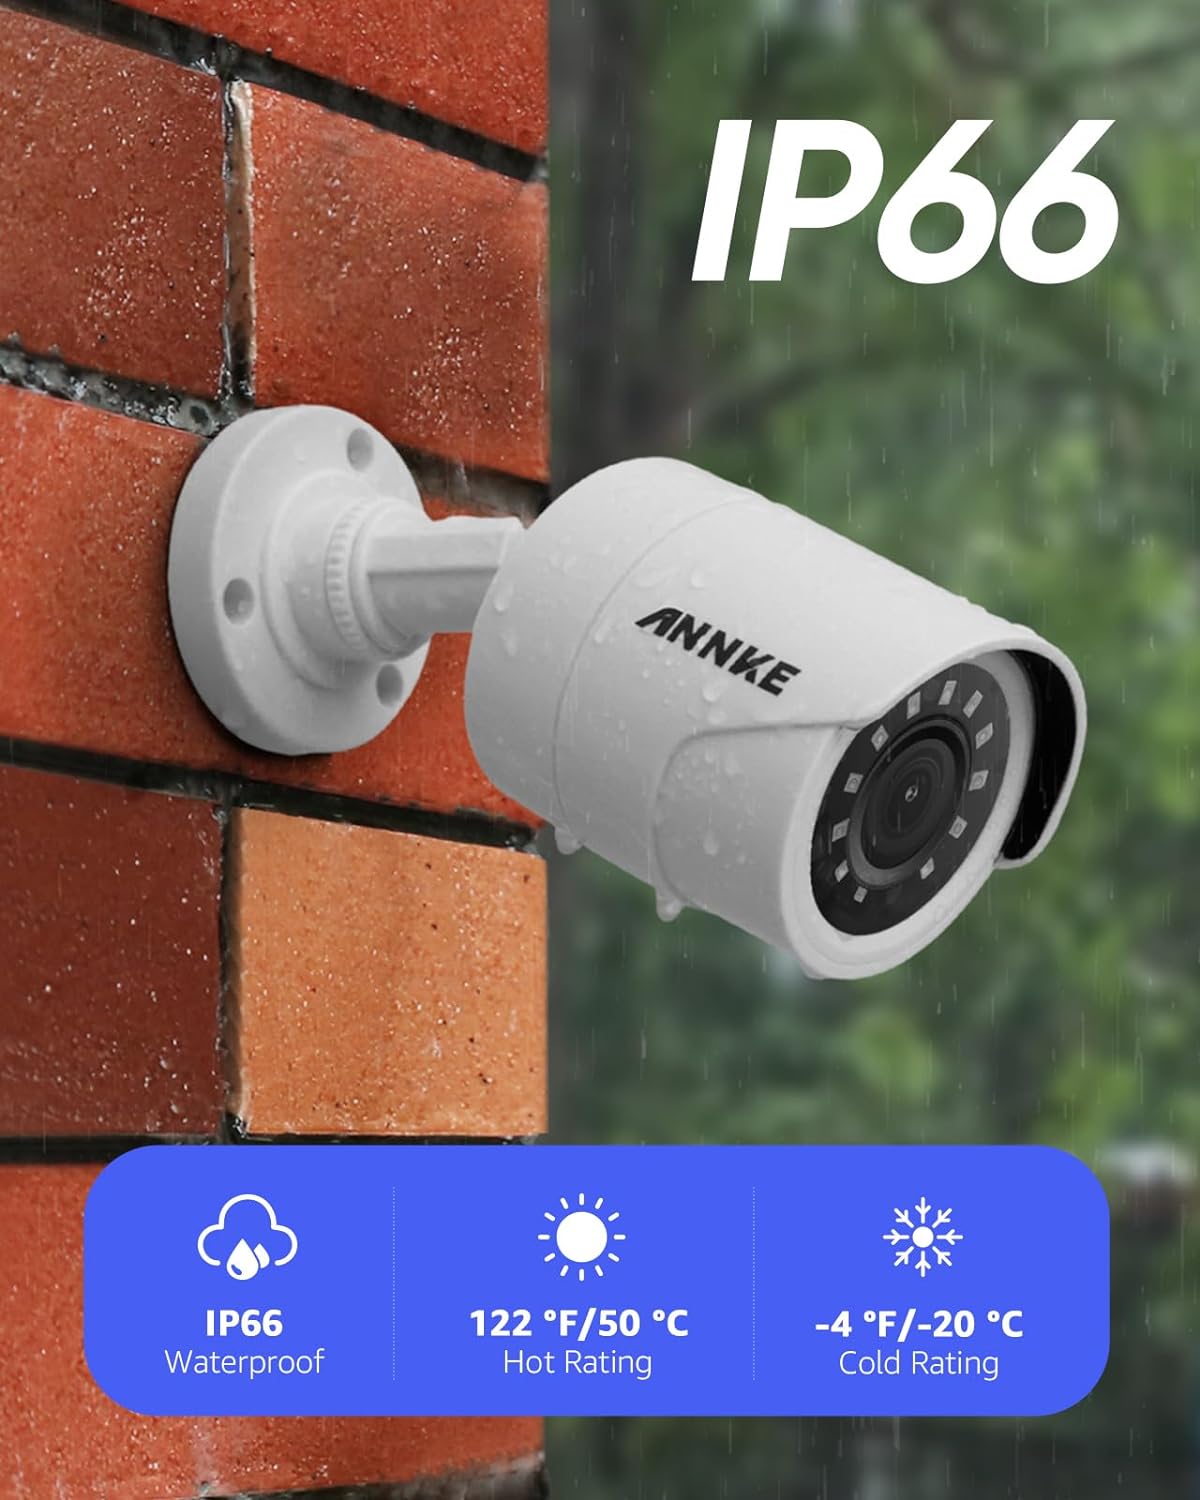 ANNKE 1080P CCTV Home Surveillance Bullet Camera, Security Camera with IP66 Weatherproof and Dustproof for Outdoor Use